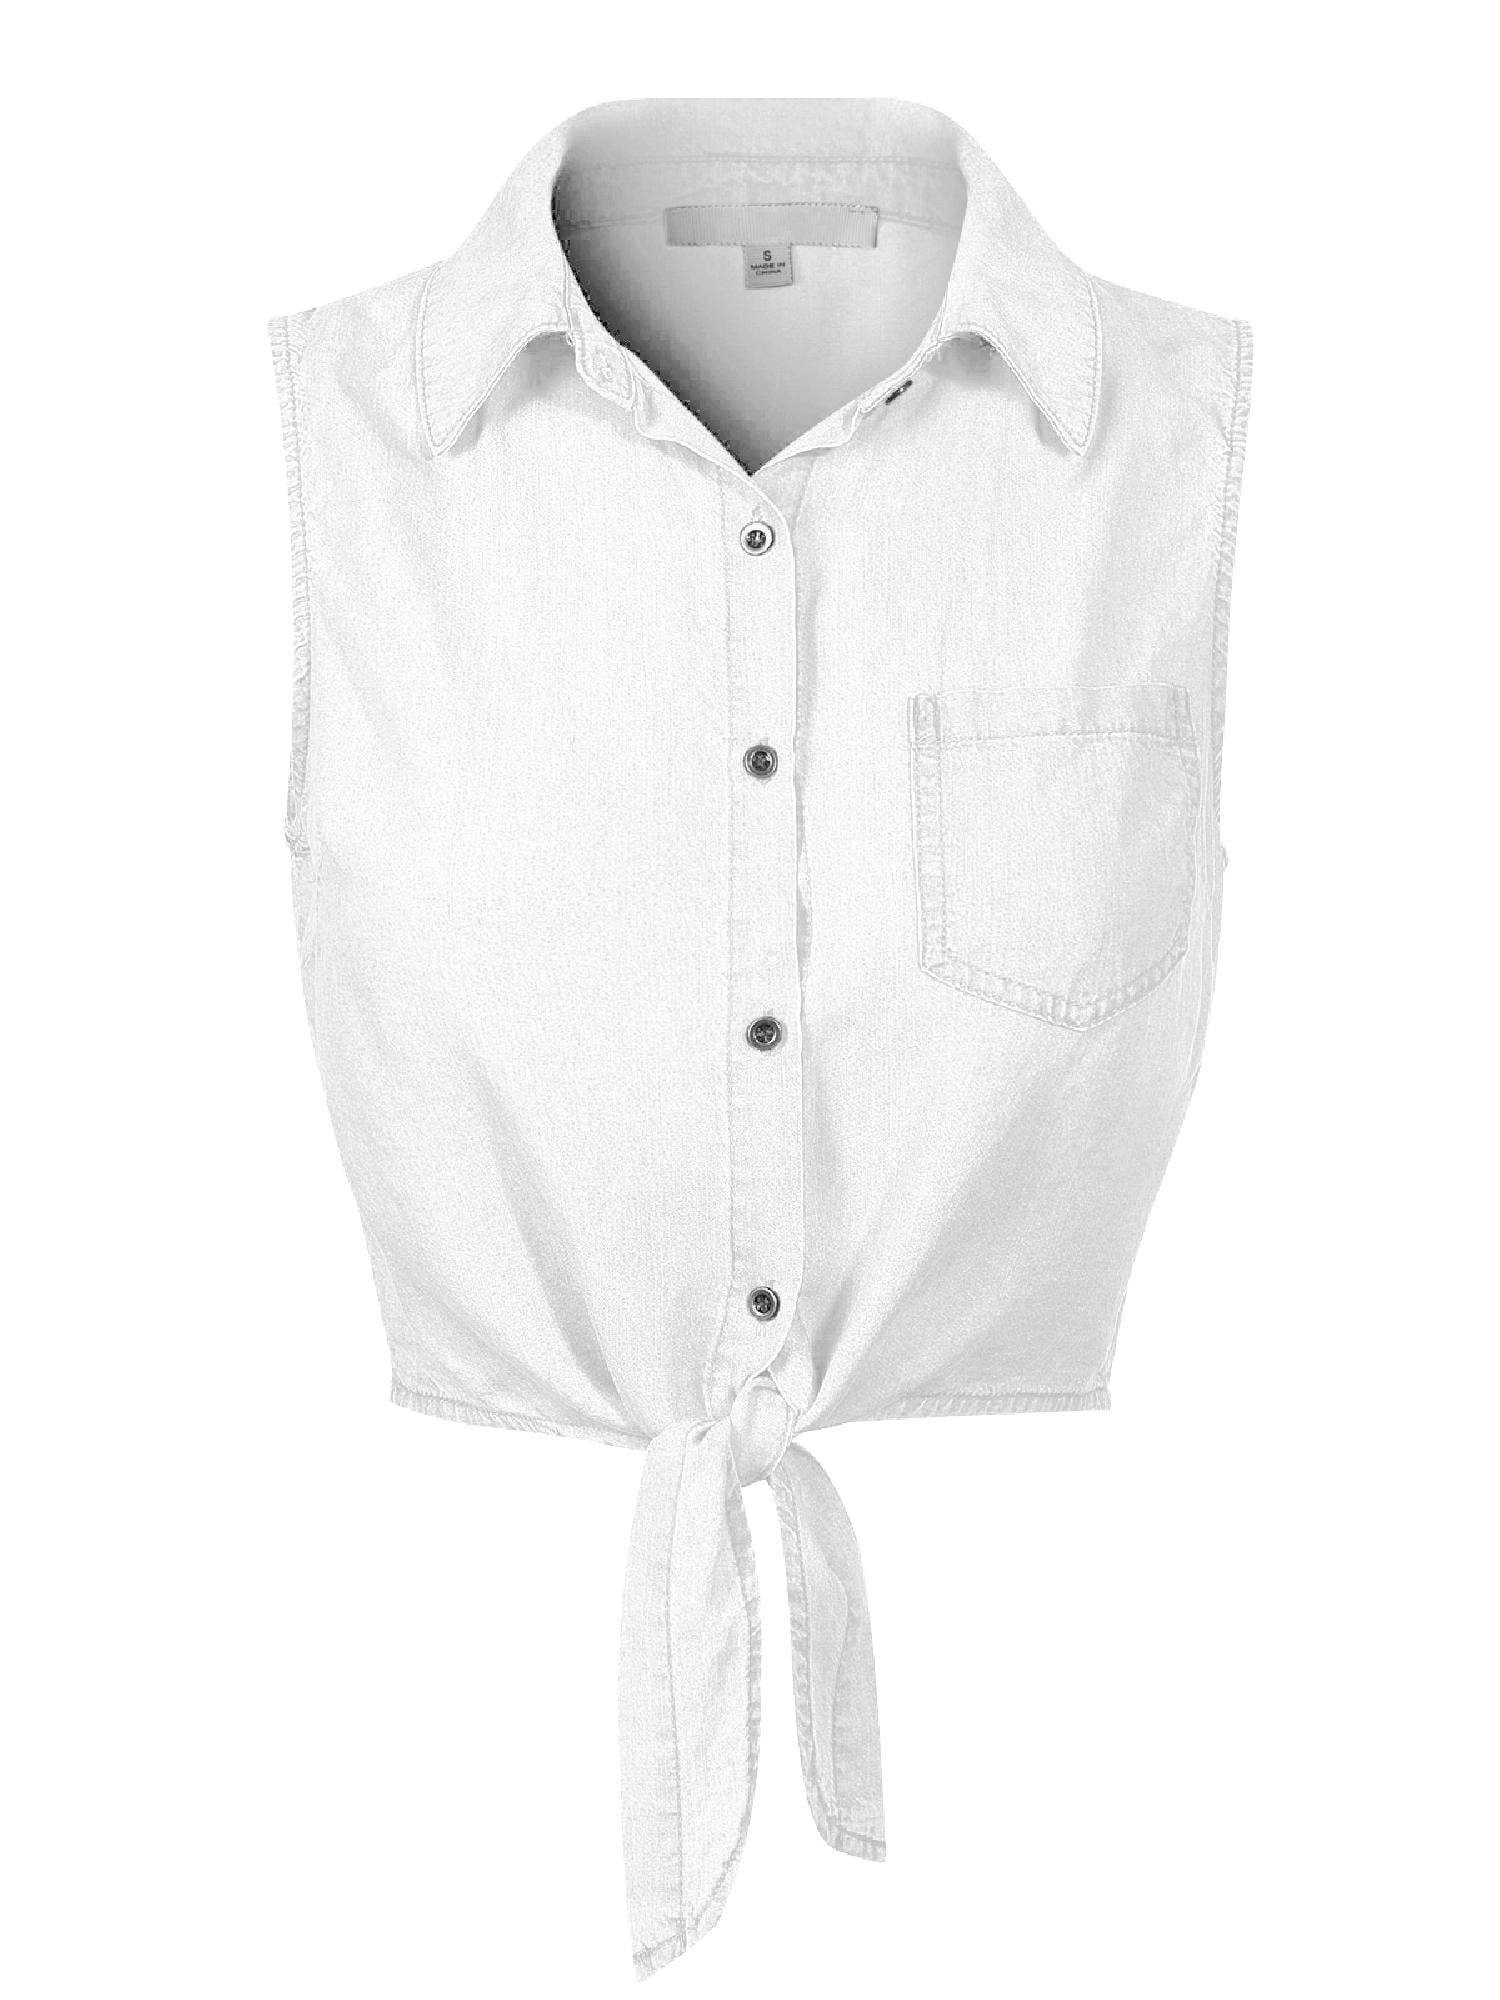 Harewom Summer Sleeveless Shirts for Women Casual Button Down V Neck Tie Knot Front Top